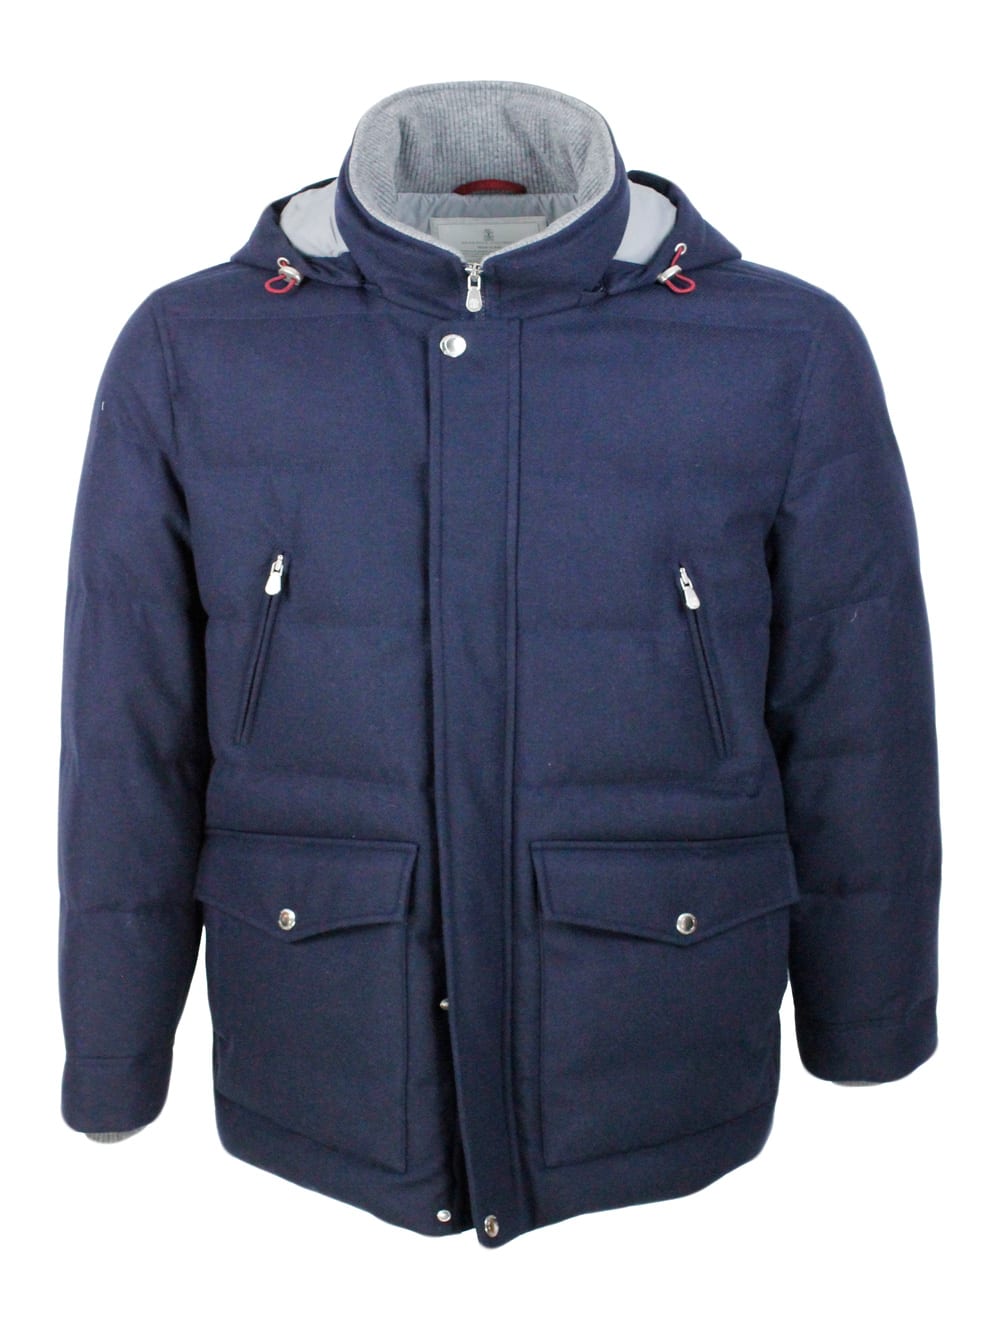 Down Jacket In Wool, Silk And Cashmere Padded With Fine Goose Down With Detachable Hood And Front Pockets